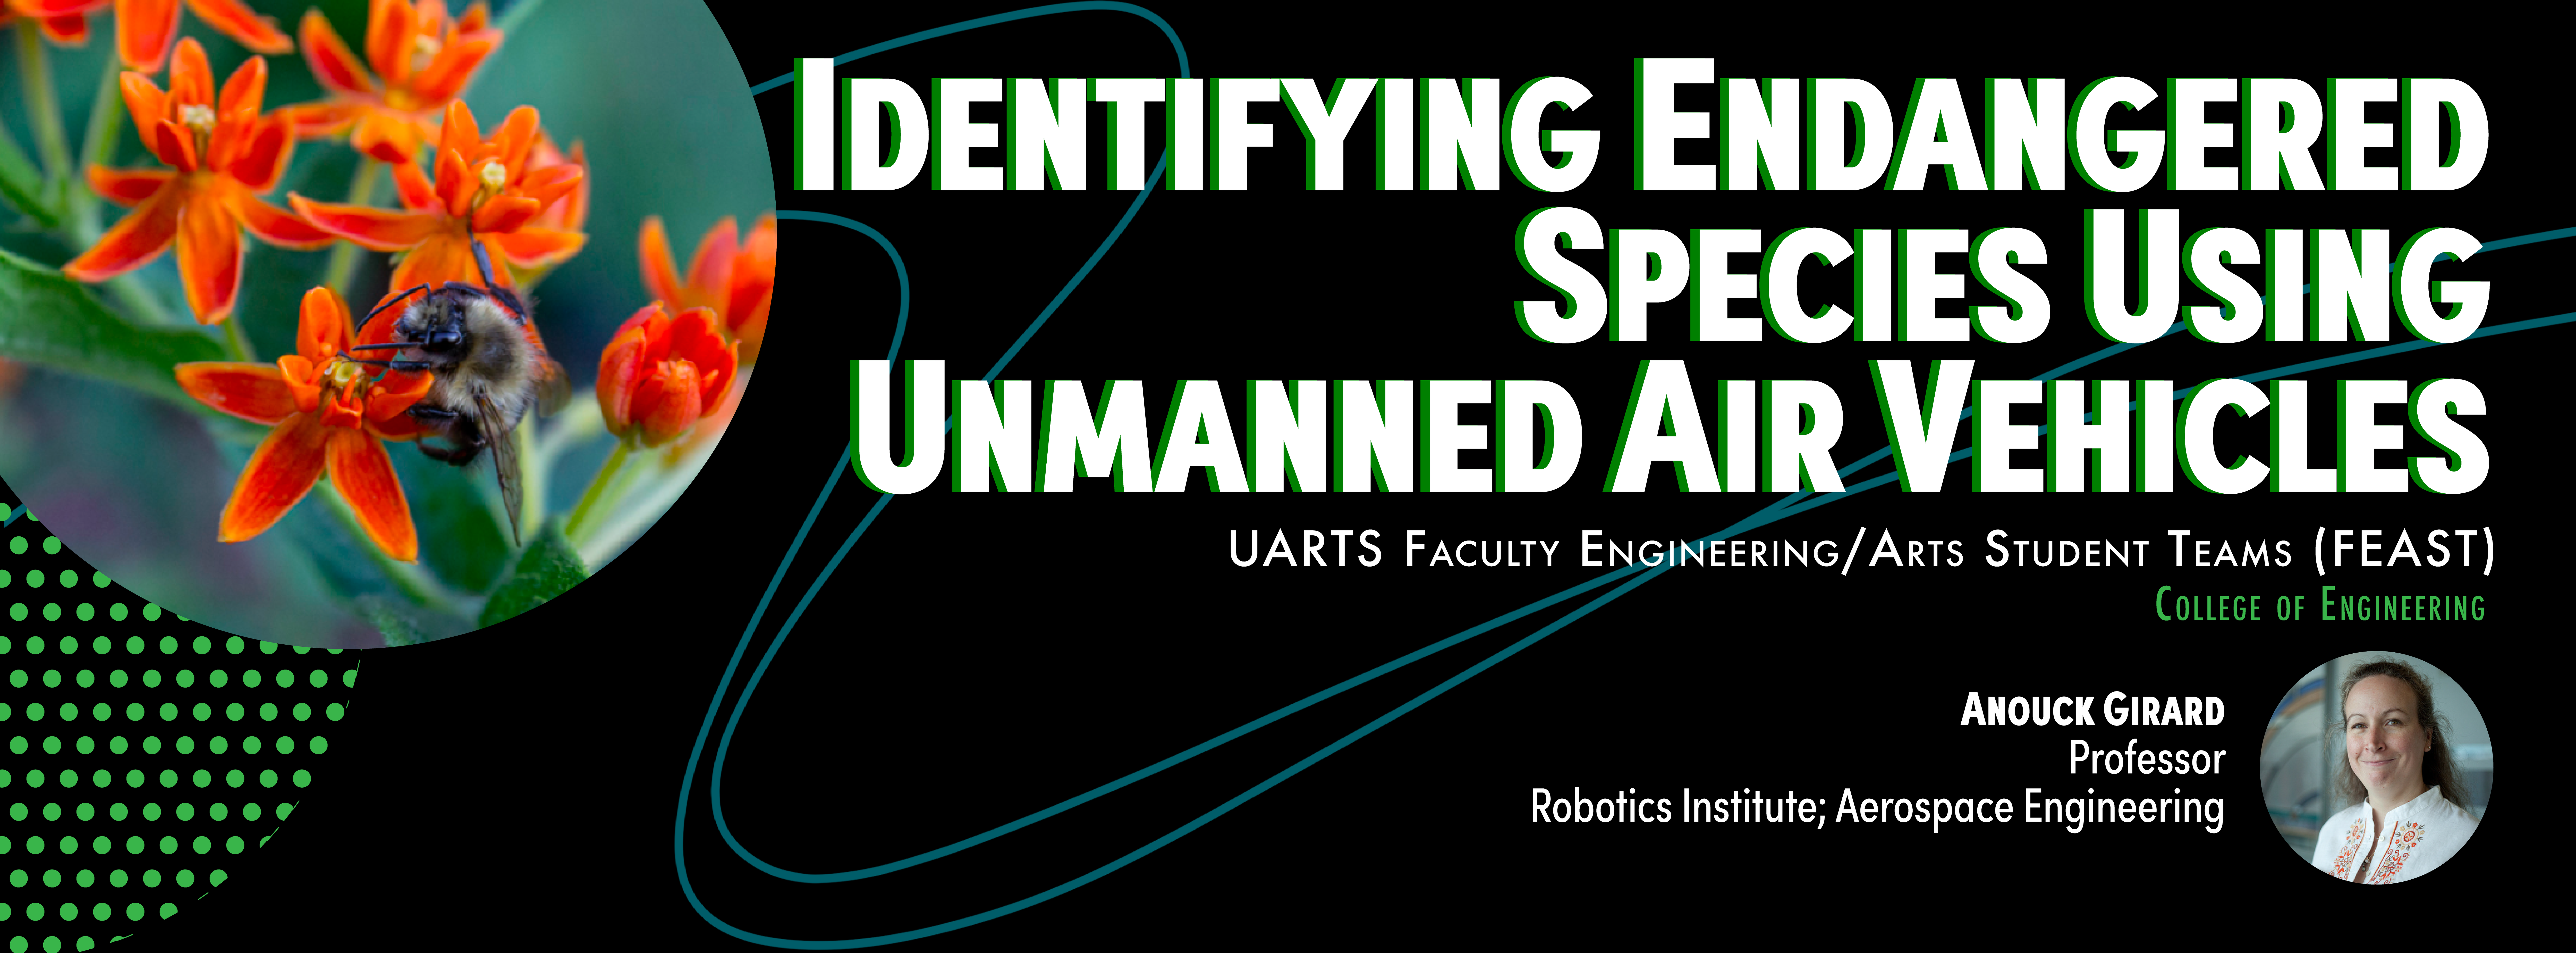 identifying endangered species using unmanned air vehicles card